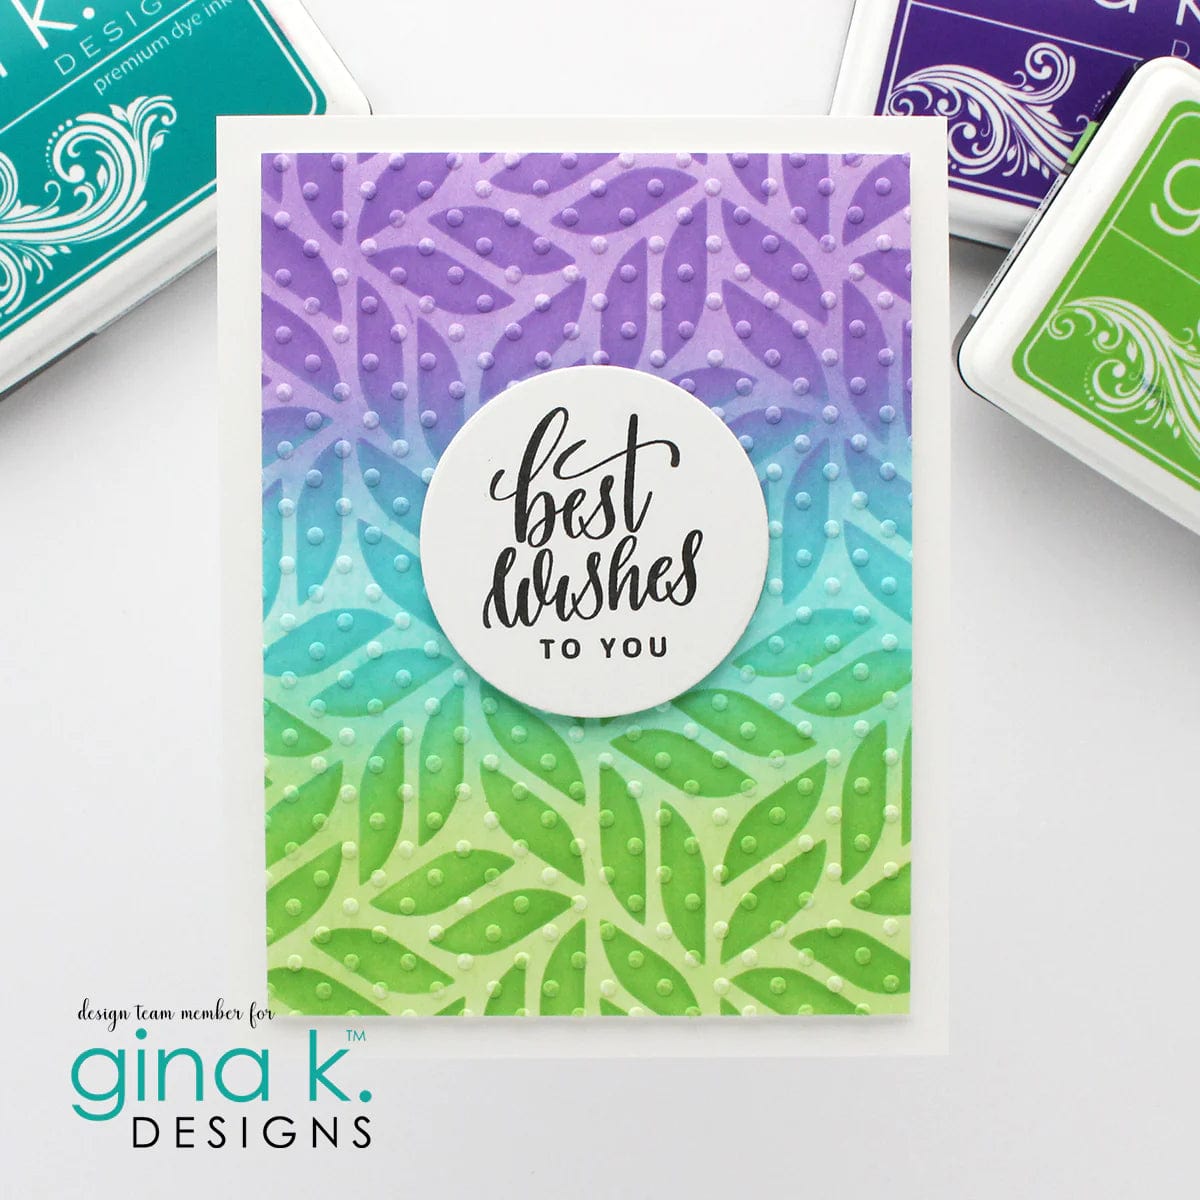 A gorgeous stencil and embossing folder combo, part of a new bundle from Gina  K. Designs - CZ Design